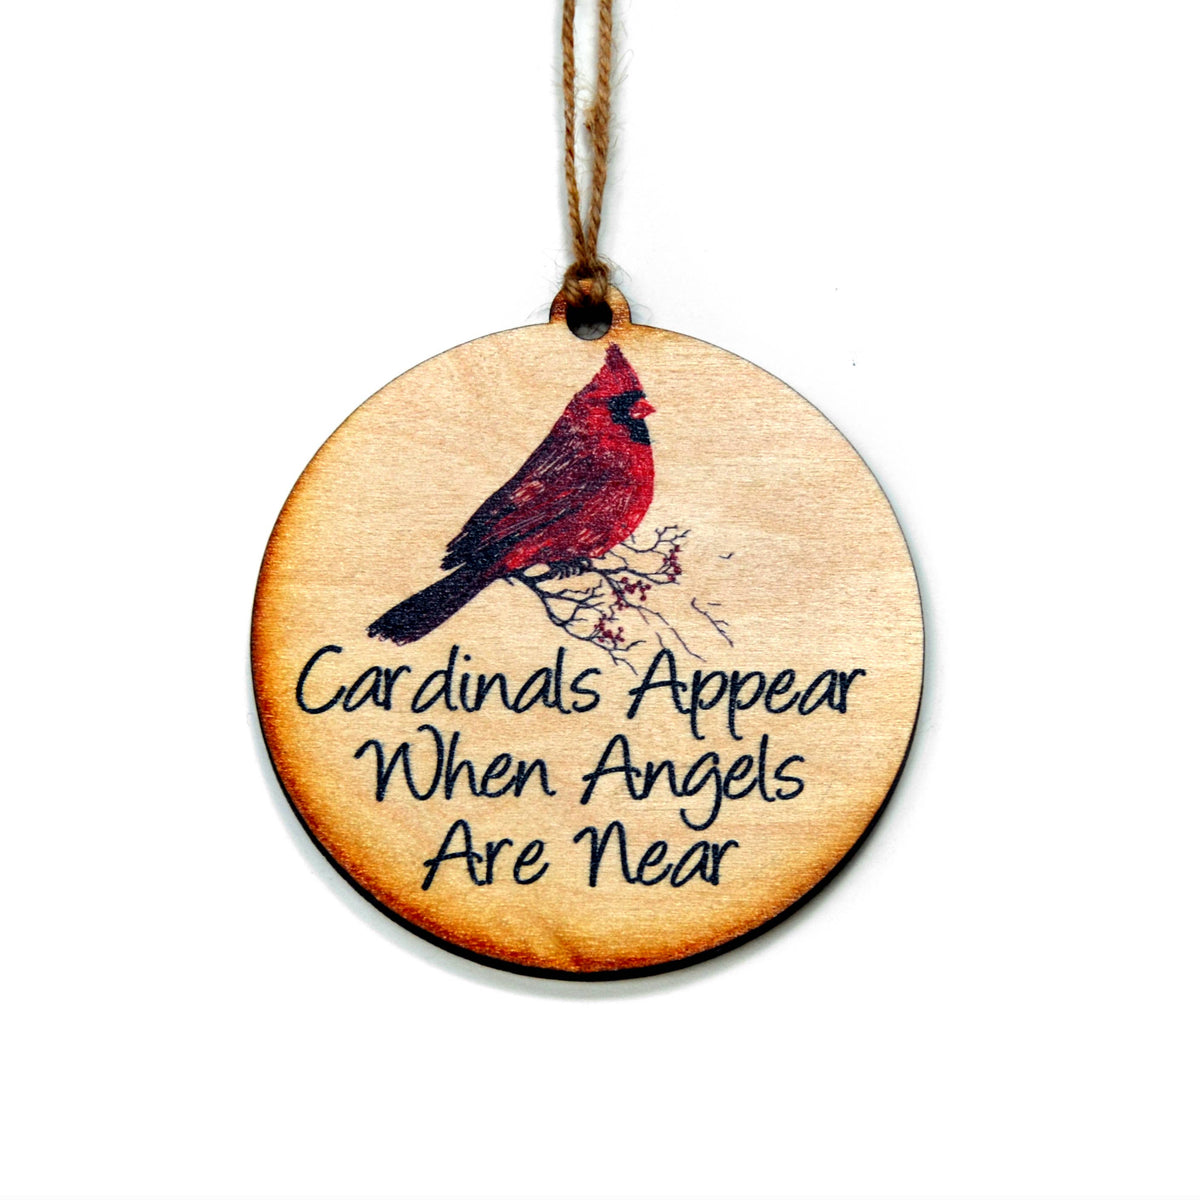 When Angels Appear Cardinals Are Near Wooden Ornament